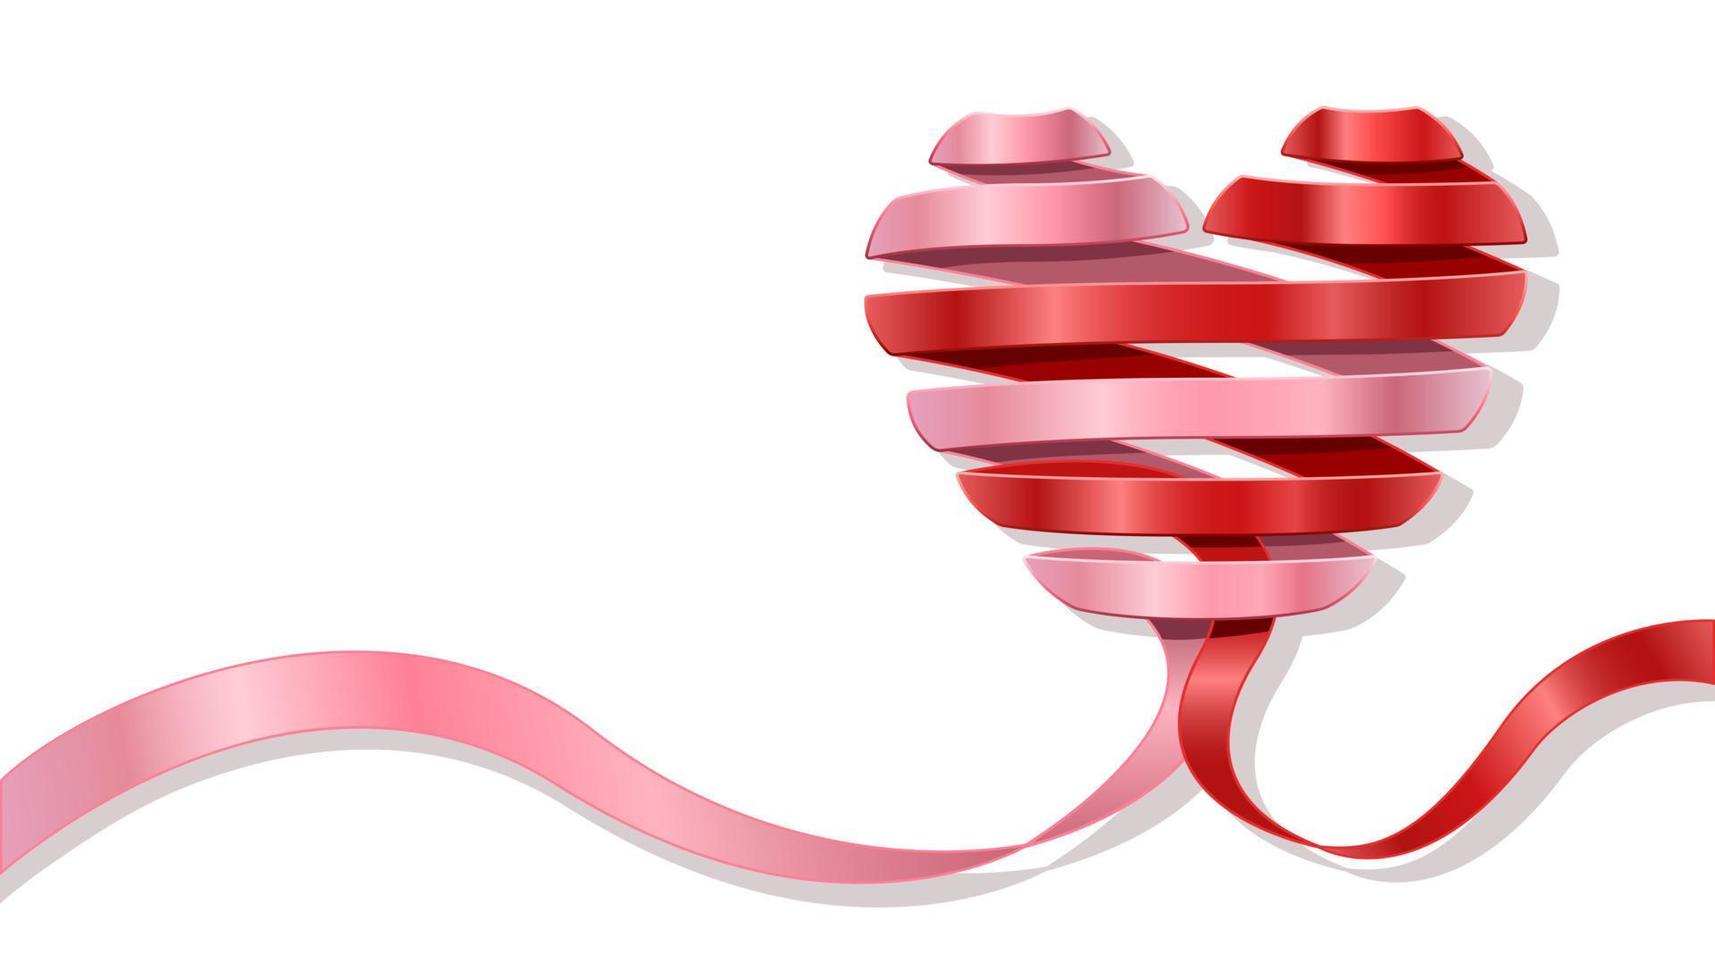 pink and red ribbons in shape of heart 3d realistic isolated white background vector